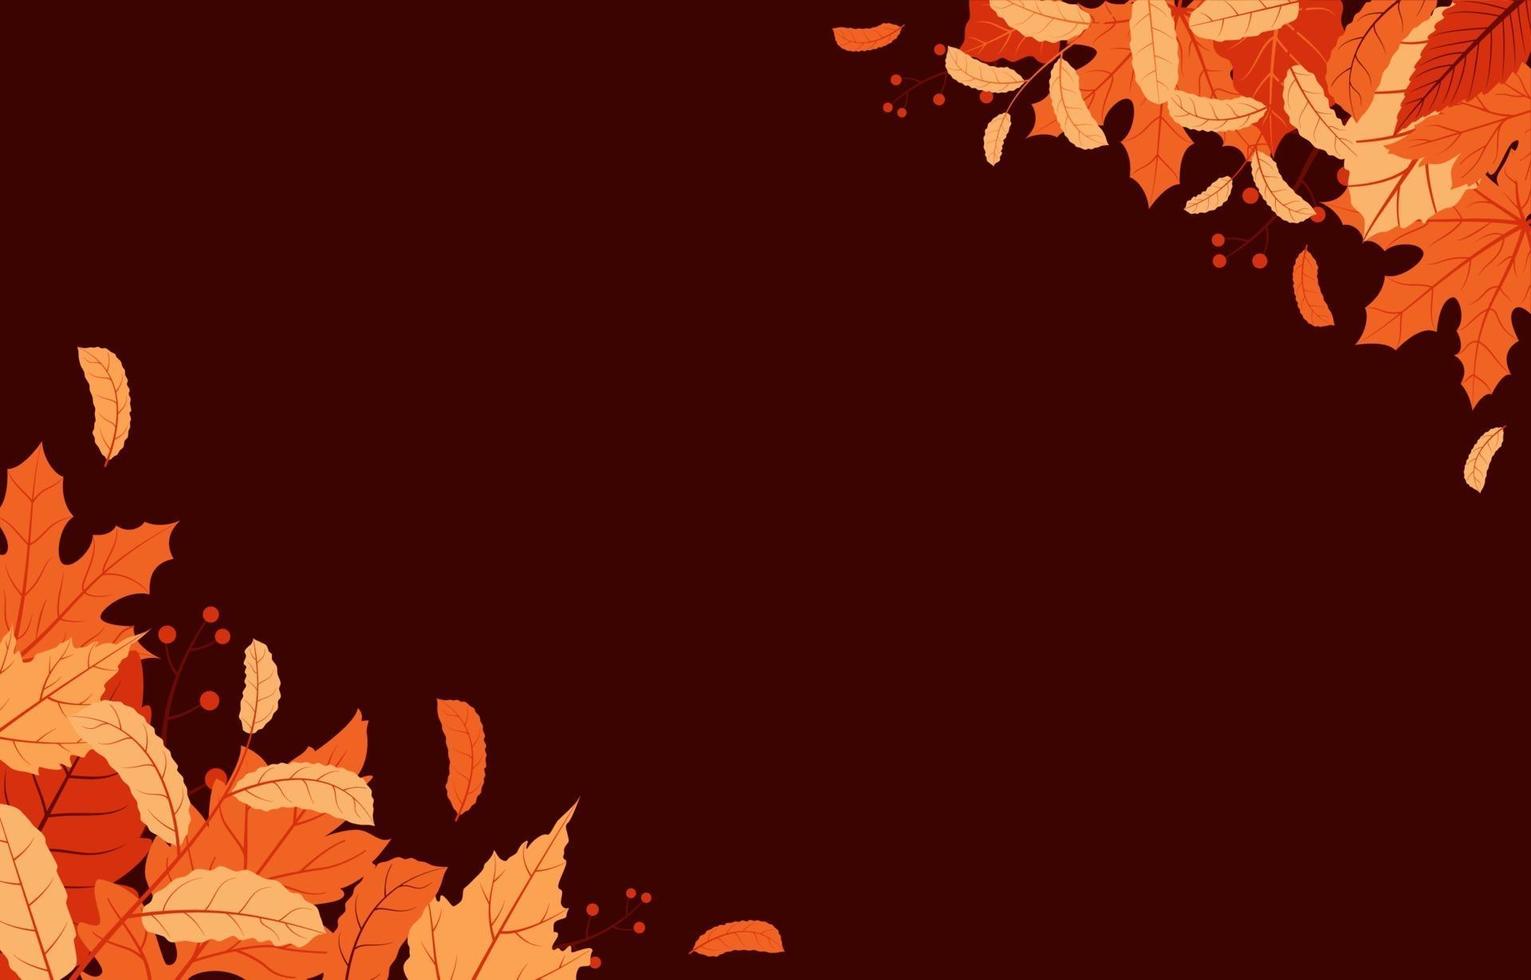 Autumn Season Background with Red and Yellow Leaves vector